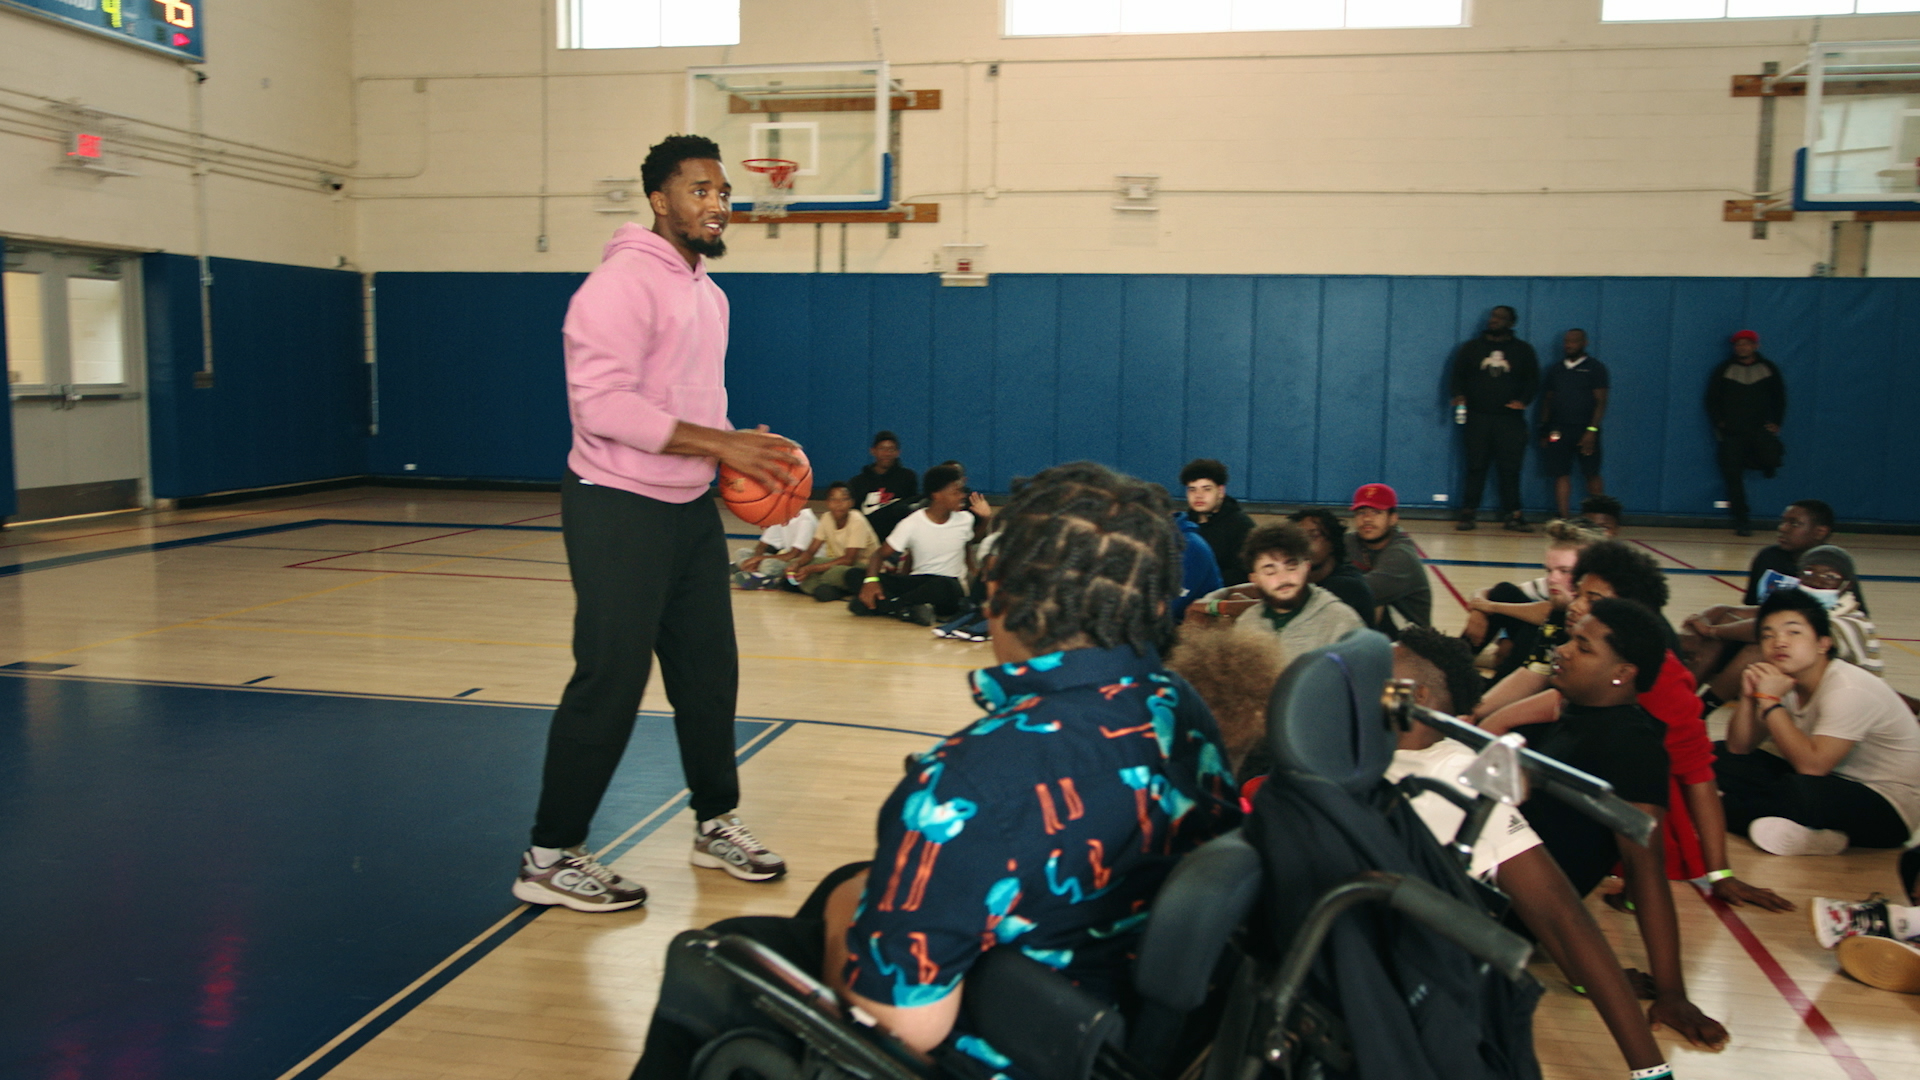 NBA star Donovan Mitchell stands in the middle of a basketball court holding a basketball. Students are seated in a semi-circle around him.